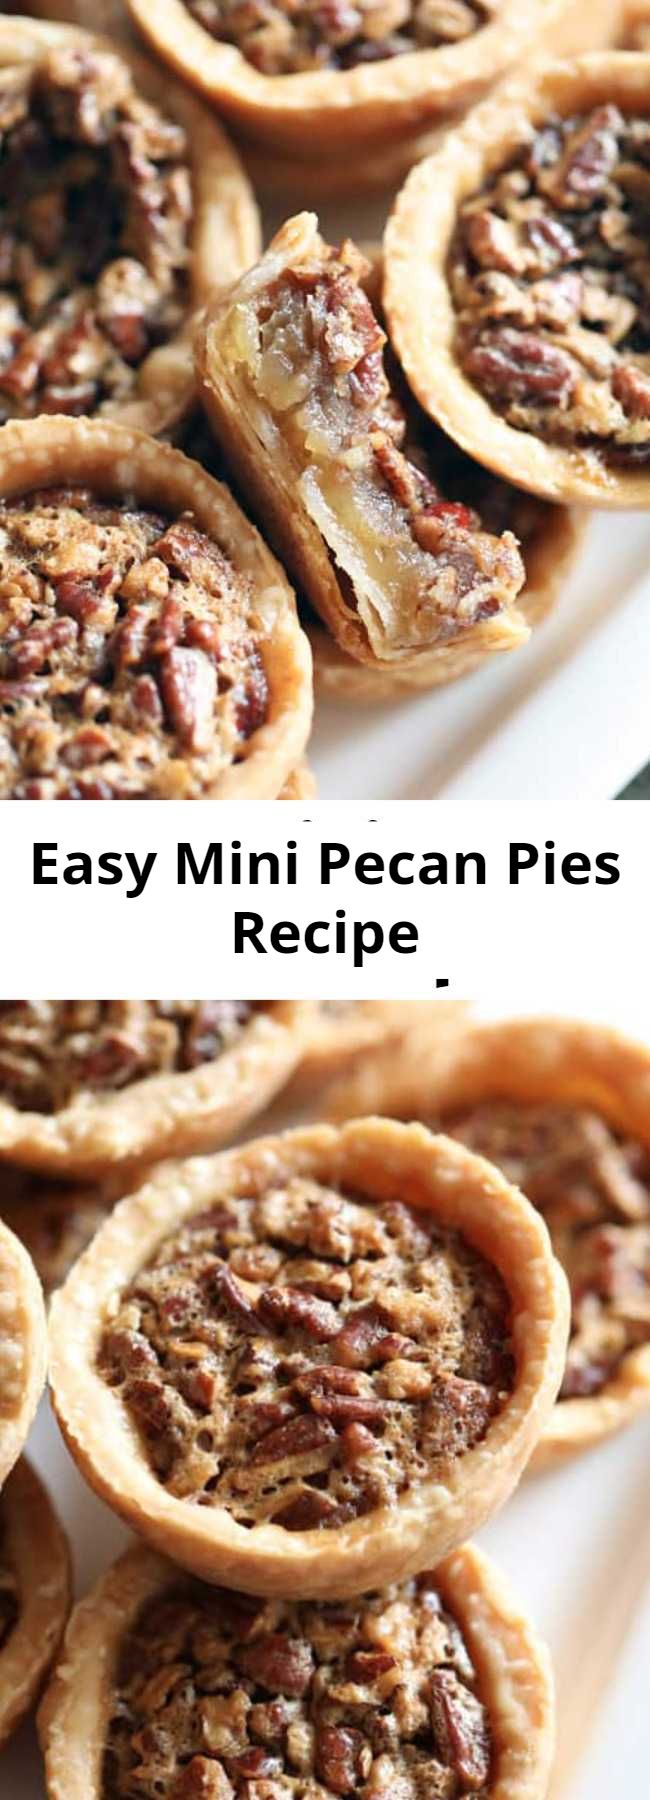 Easy Mini Pecan Pies Recipe - These Mini Pecan Pies have all the flavors of traditional pecan pie, but in mini form and individual servings. Super easy and great for entertaining! #pecanpie #minipecanpies #minipecanpieseasy #minipecanpiesinamuffintin